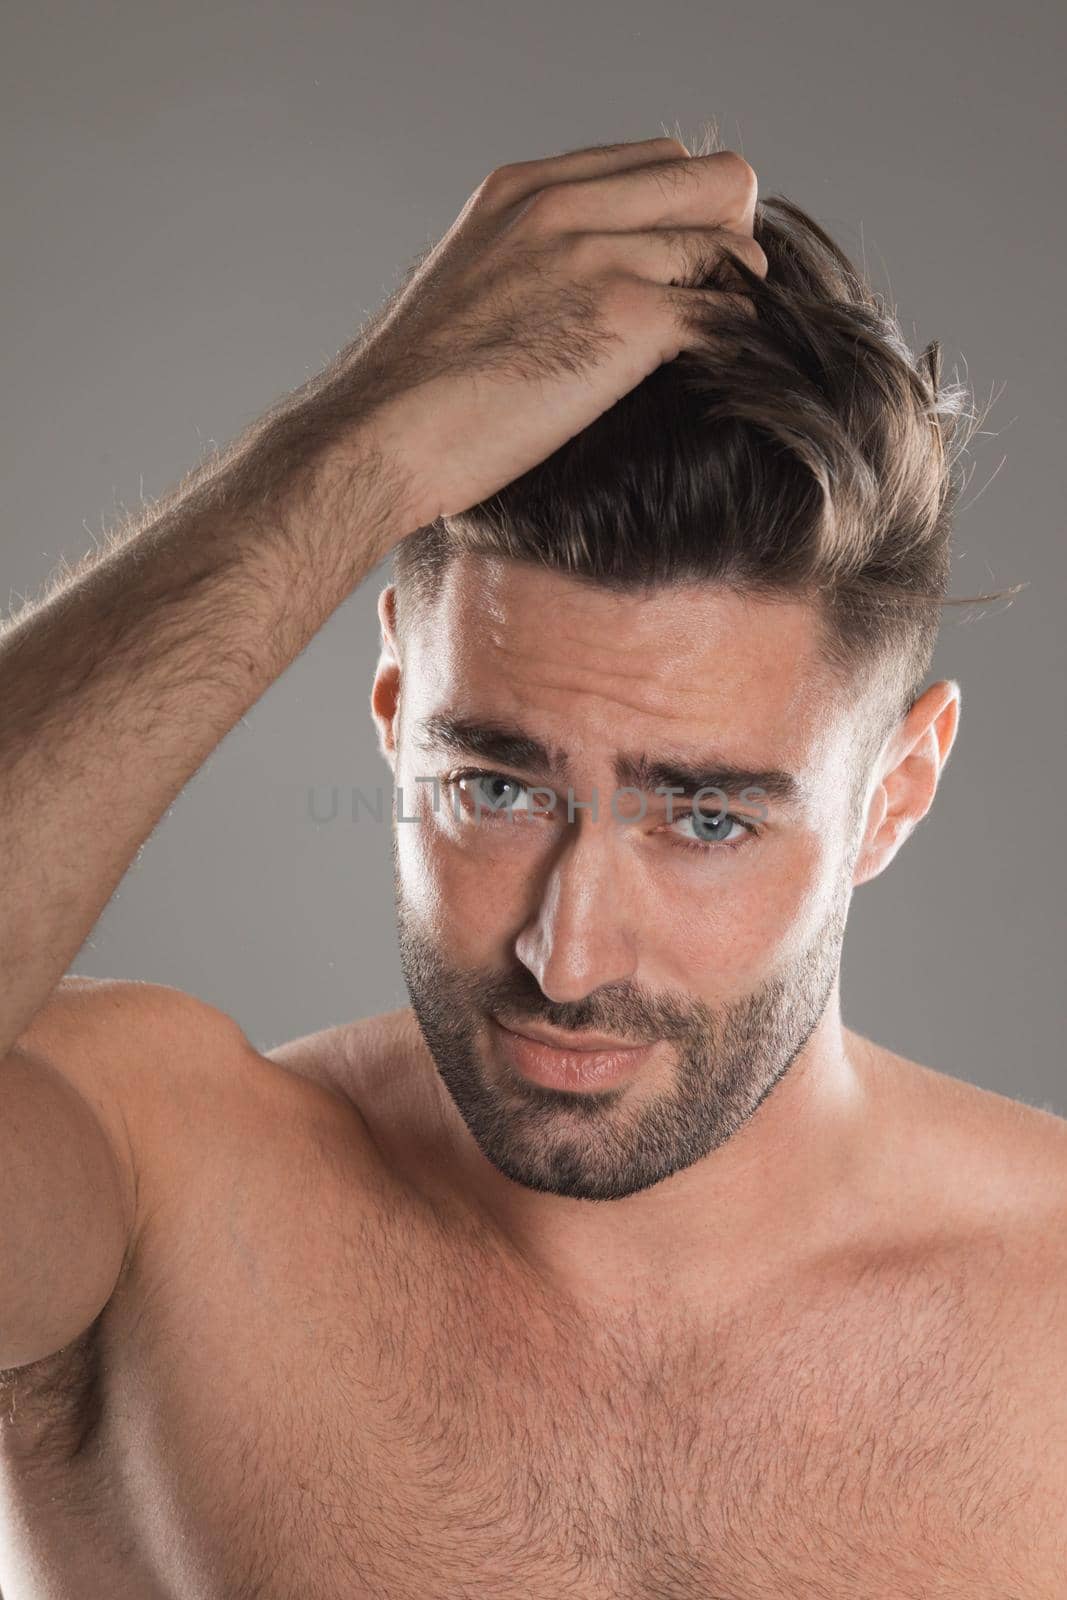 Handsome naked man touching his hair by ALotOfPeople